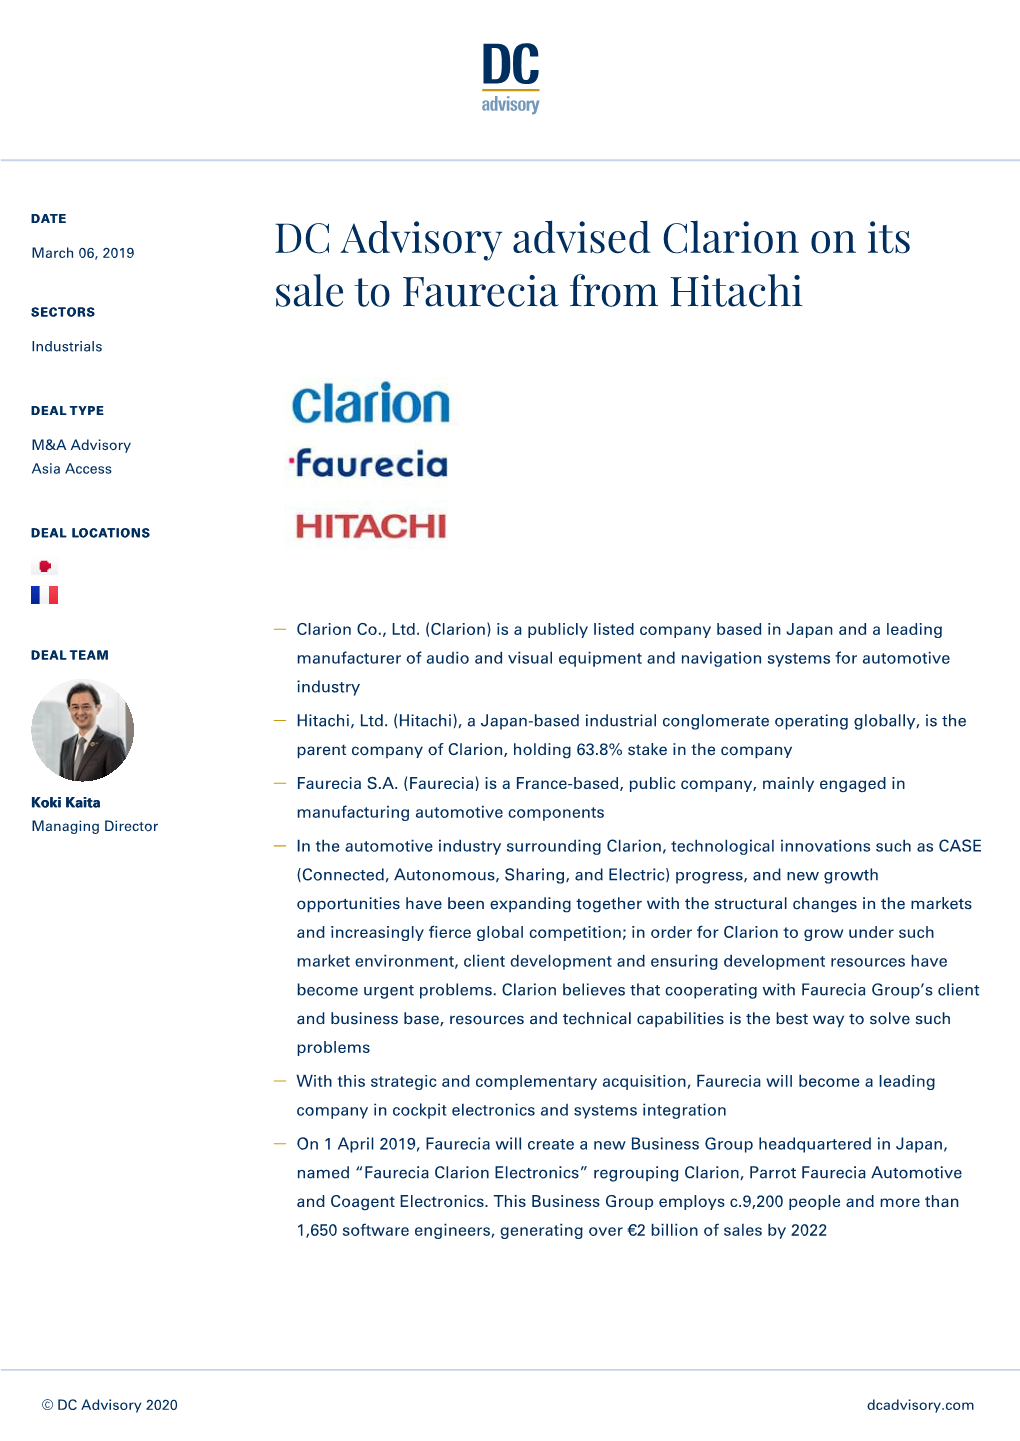 DC Advisory Advised Clarion on Its Sale to Faurecia from Hitachi